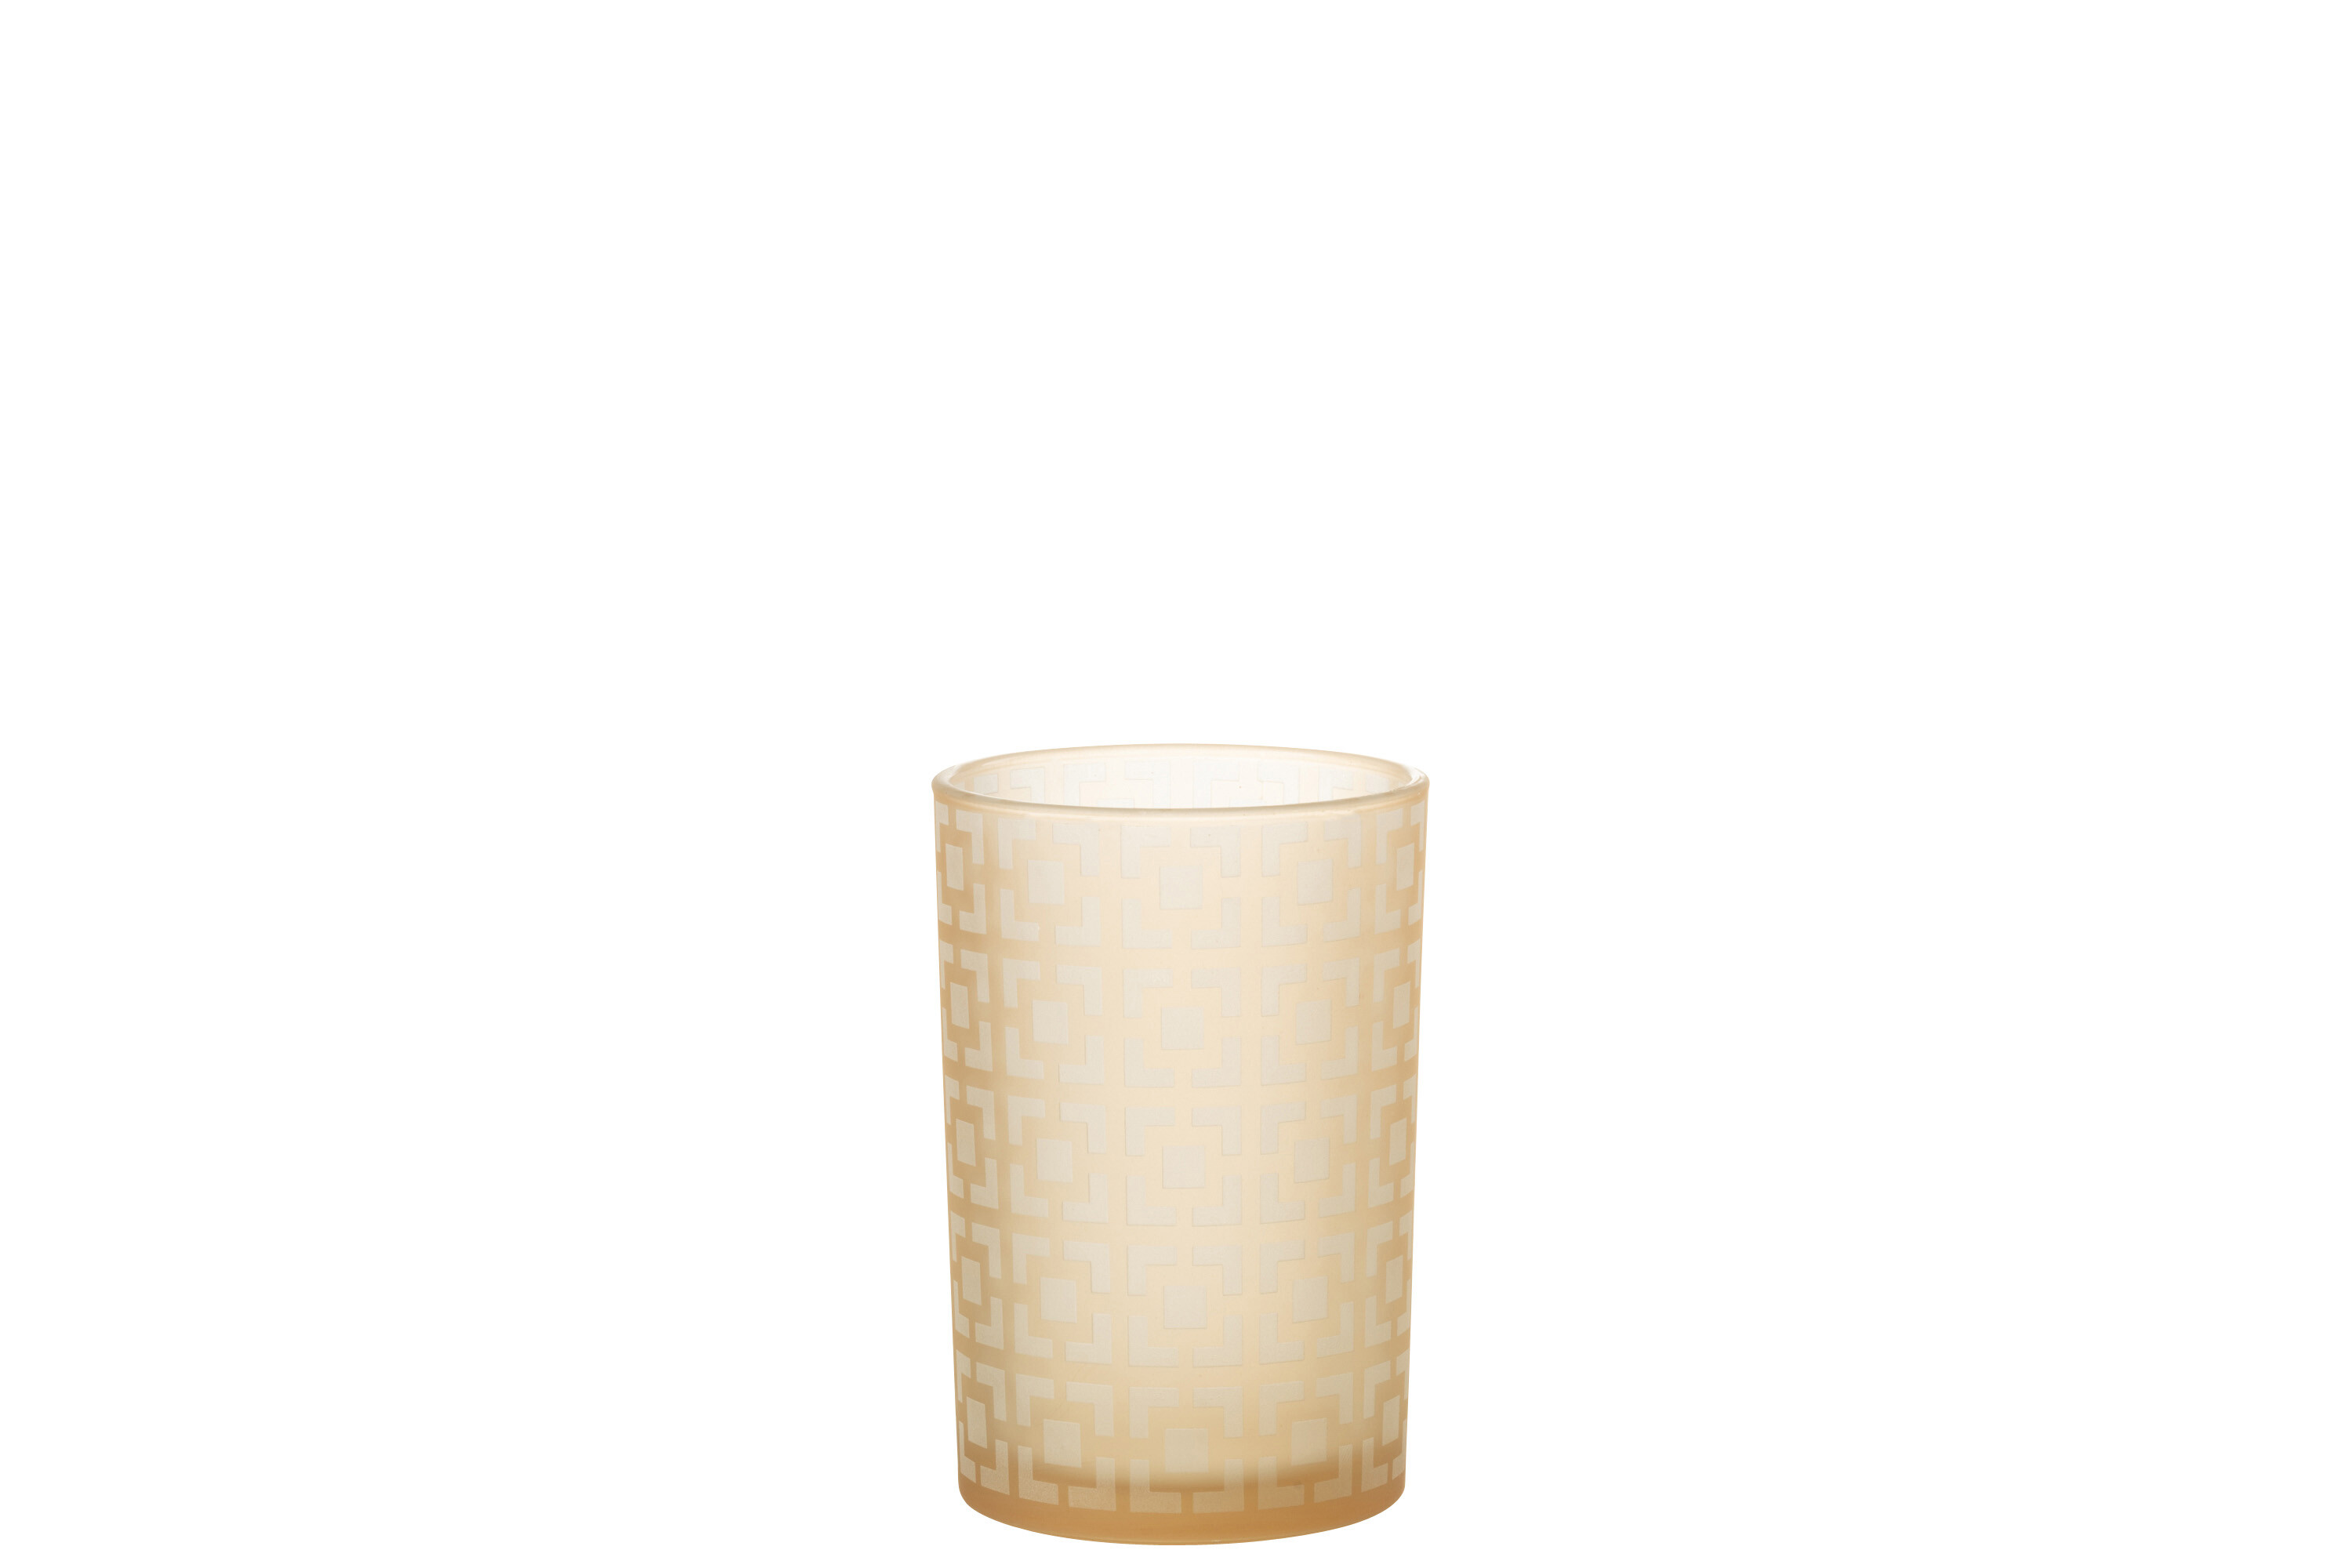 PHPH CARRES VERRE BEIGE L 